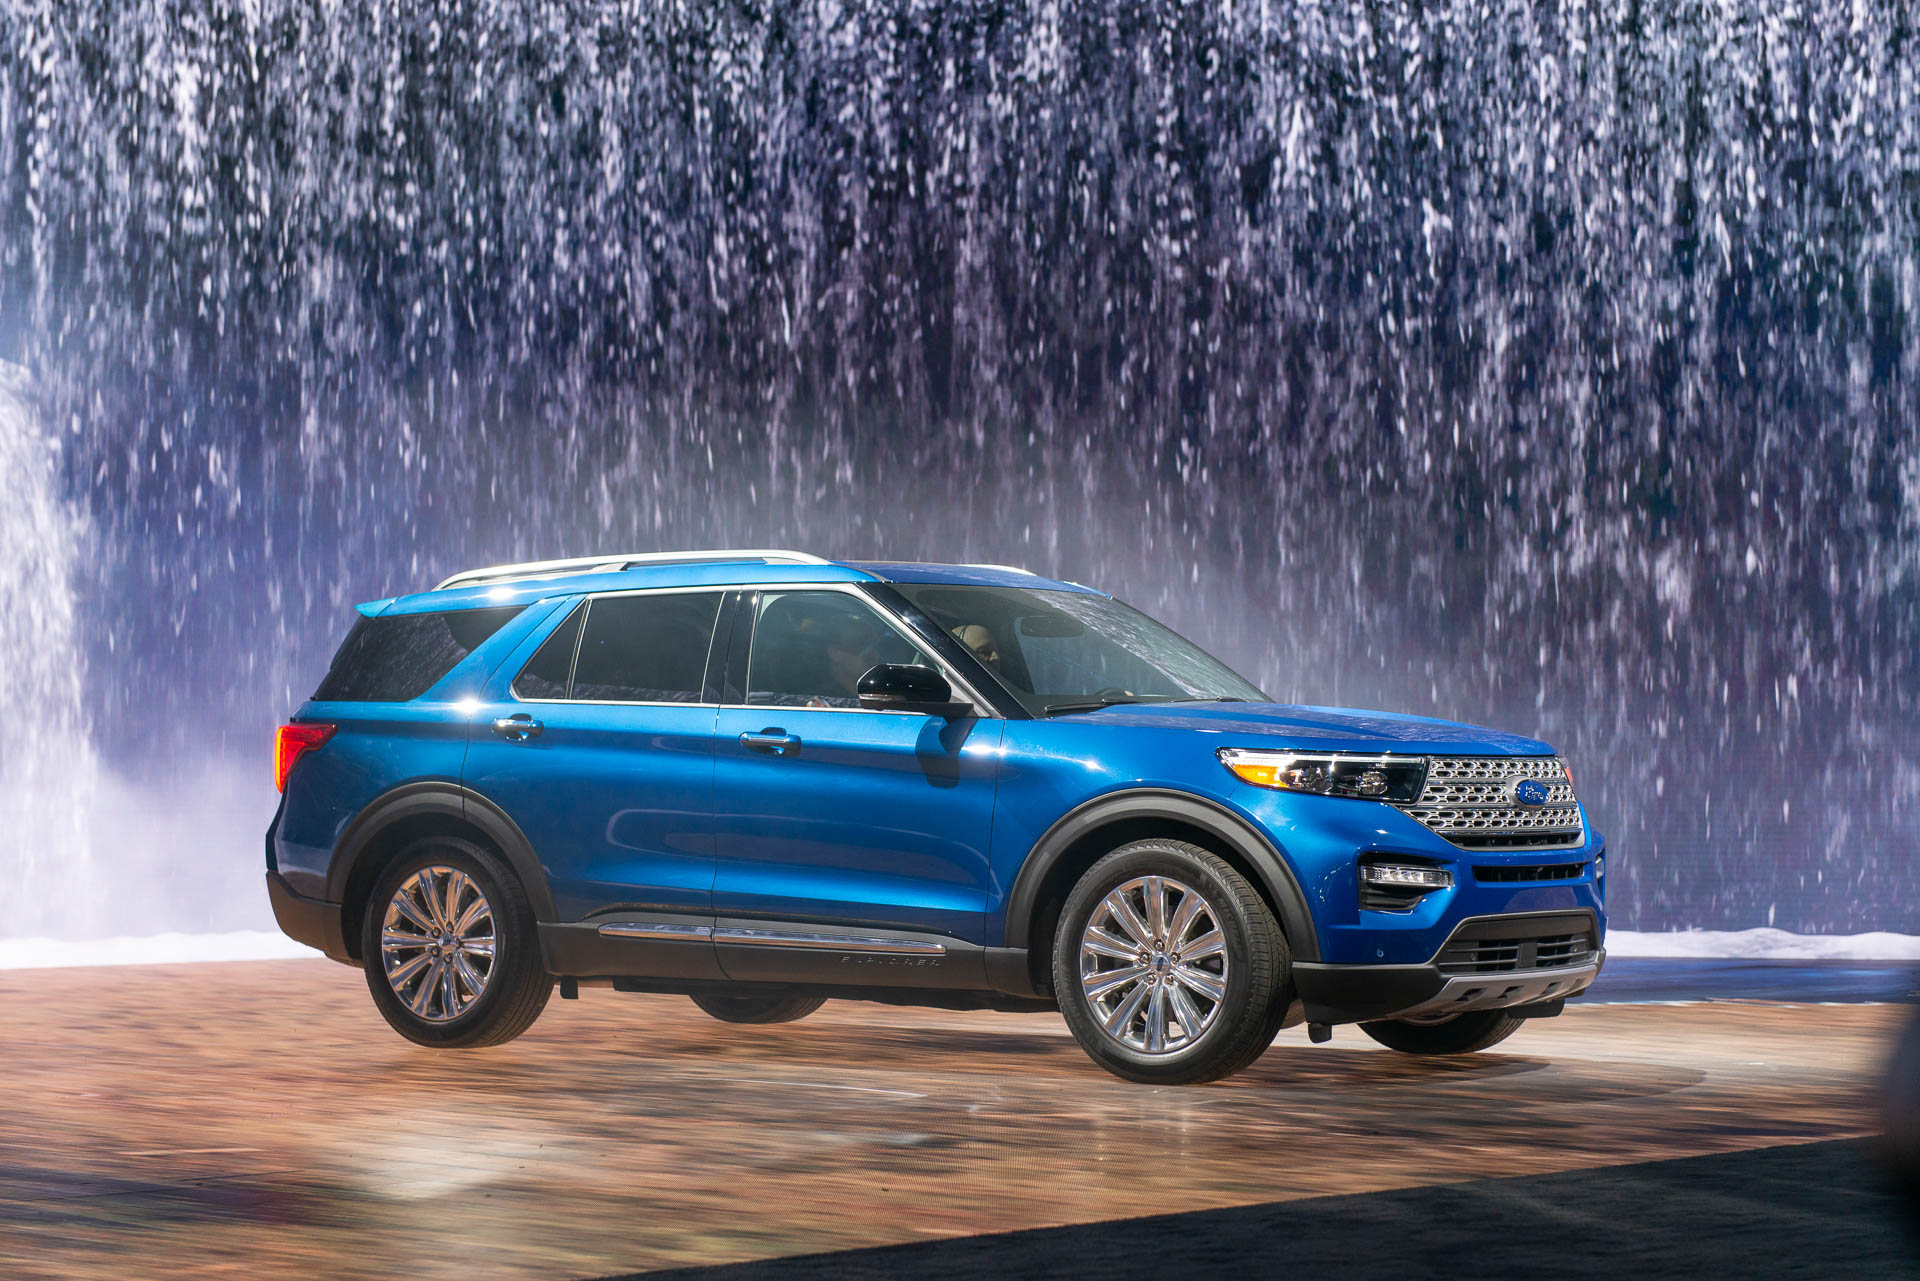 Redesigned 2020 Ford Explorer to cost $33,860 to start